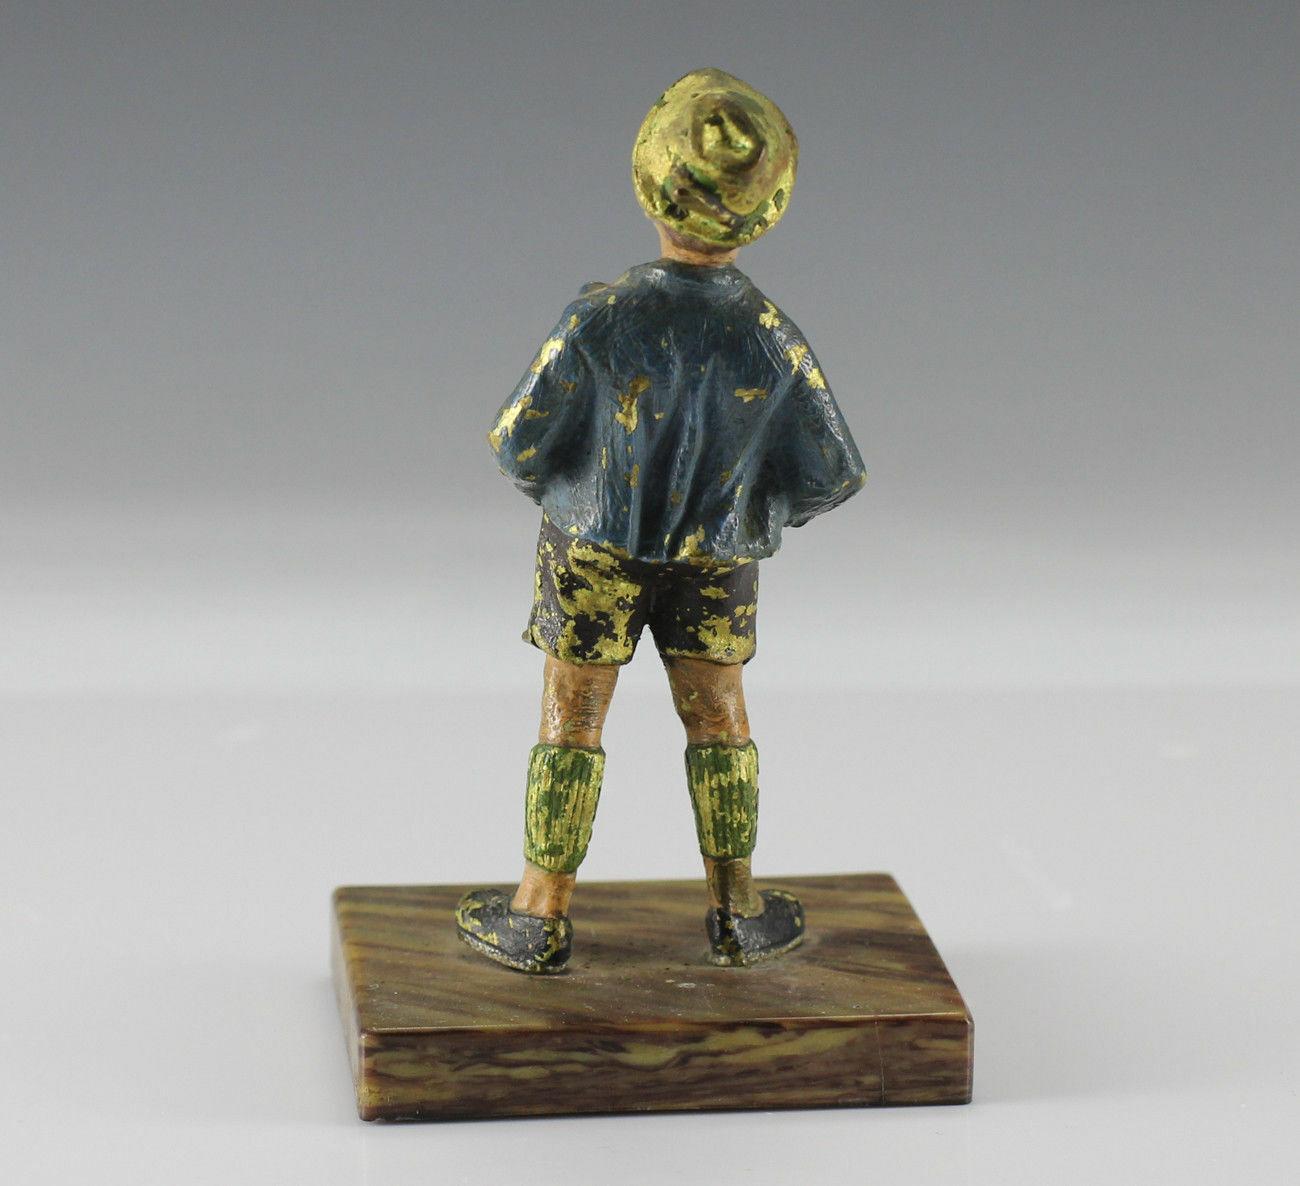 Austrian Bronze Cold Painted Boy in Lederhosen Figurine, 19th century

Hands in pockets, whimsical look on his face. Mounted on square base of some sort of composite material.

Additional Information:
Type: Figurine 
Brand: Unbranded
Primary